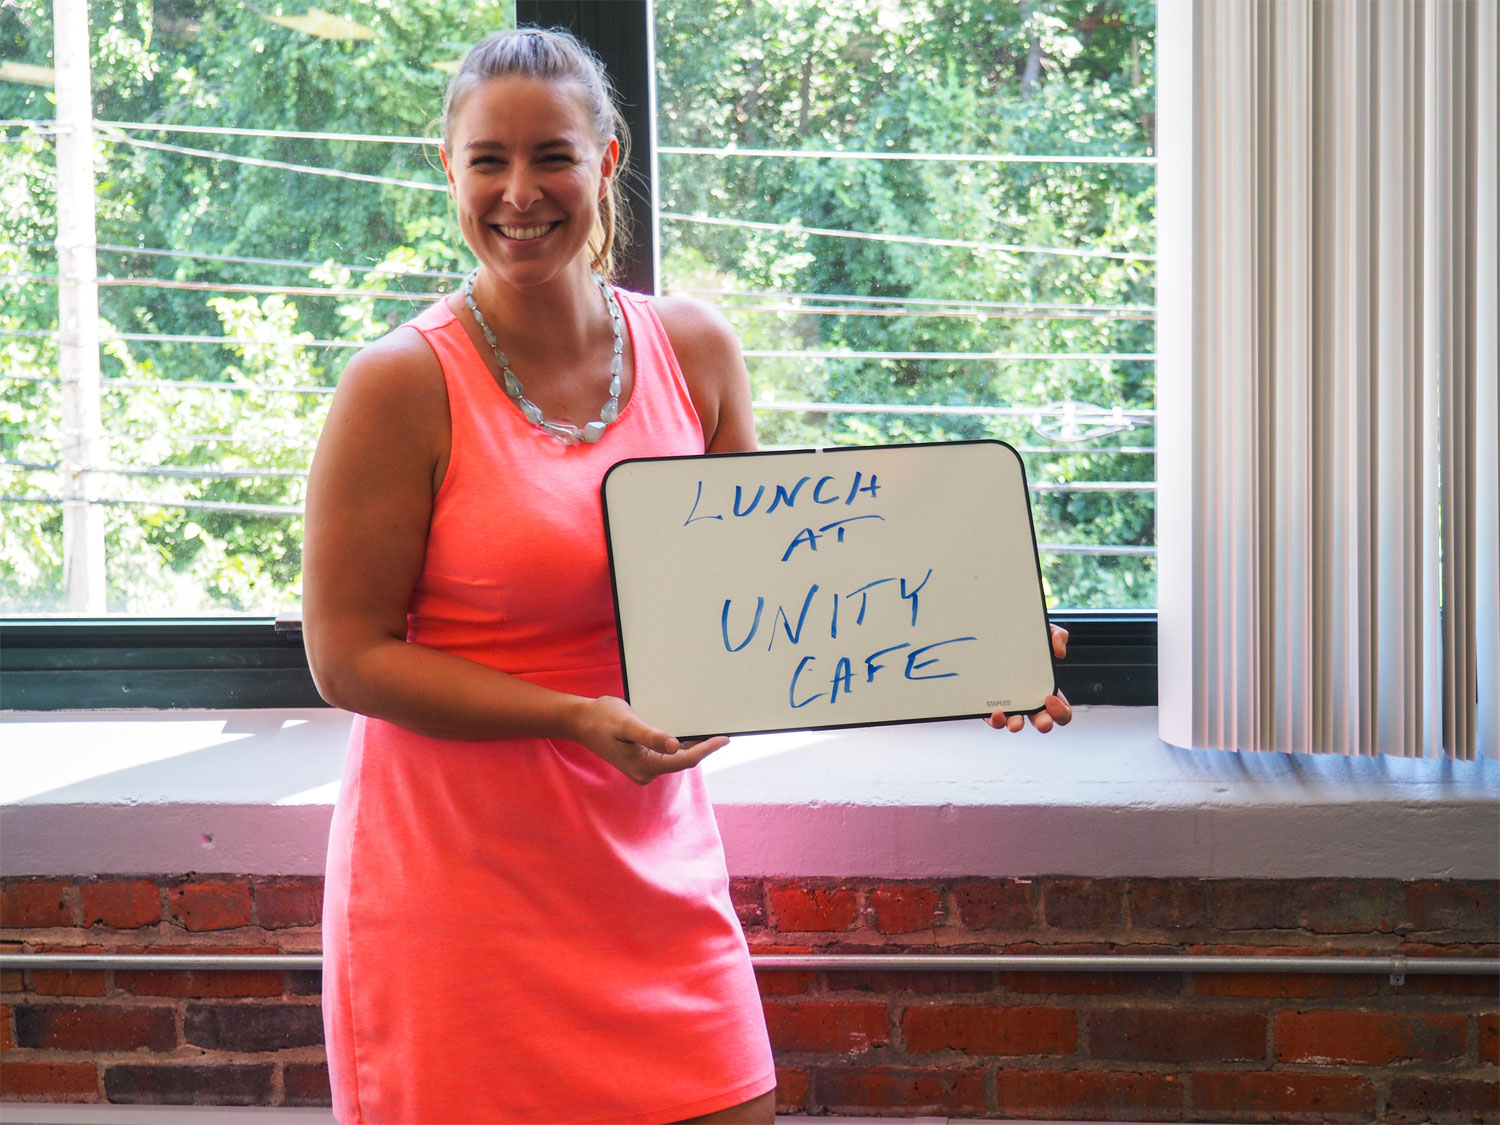 Why should YOU join the team? Jessica Thamm, Account Manager in Manchester NH, thinks lunch at Unity Café is a good reason. (Highly recommended)!